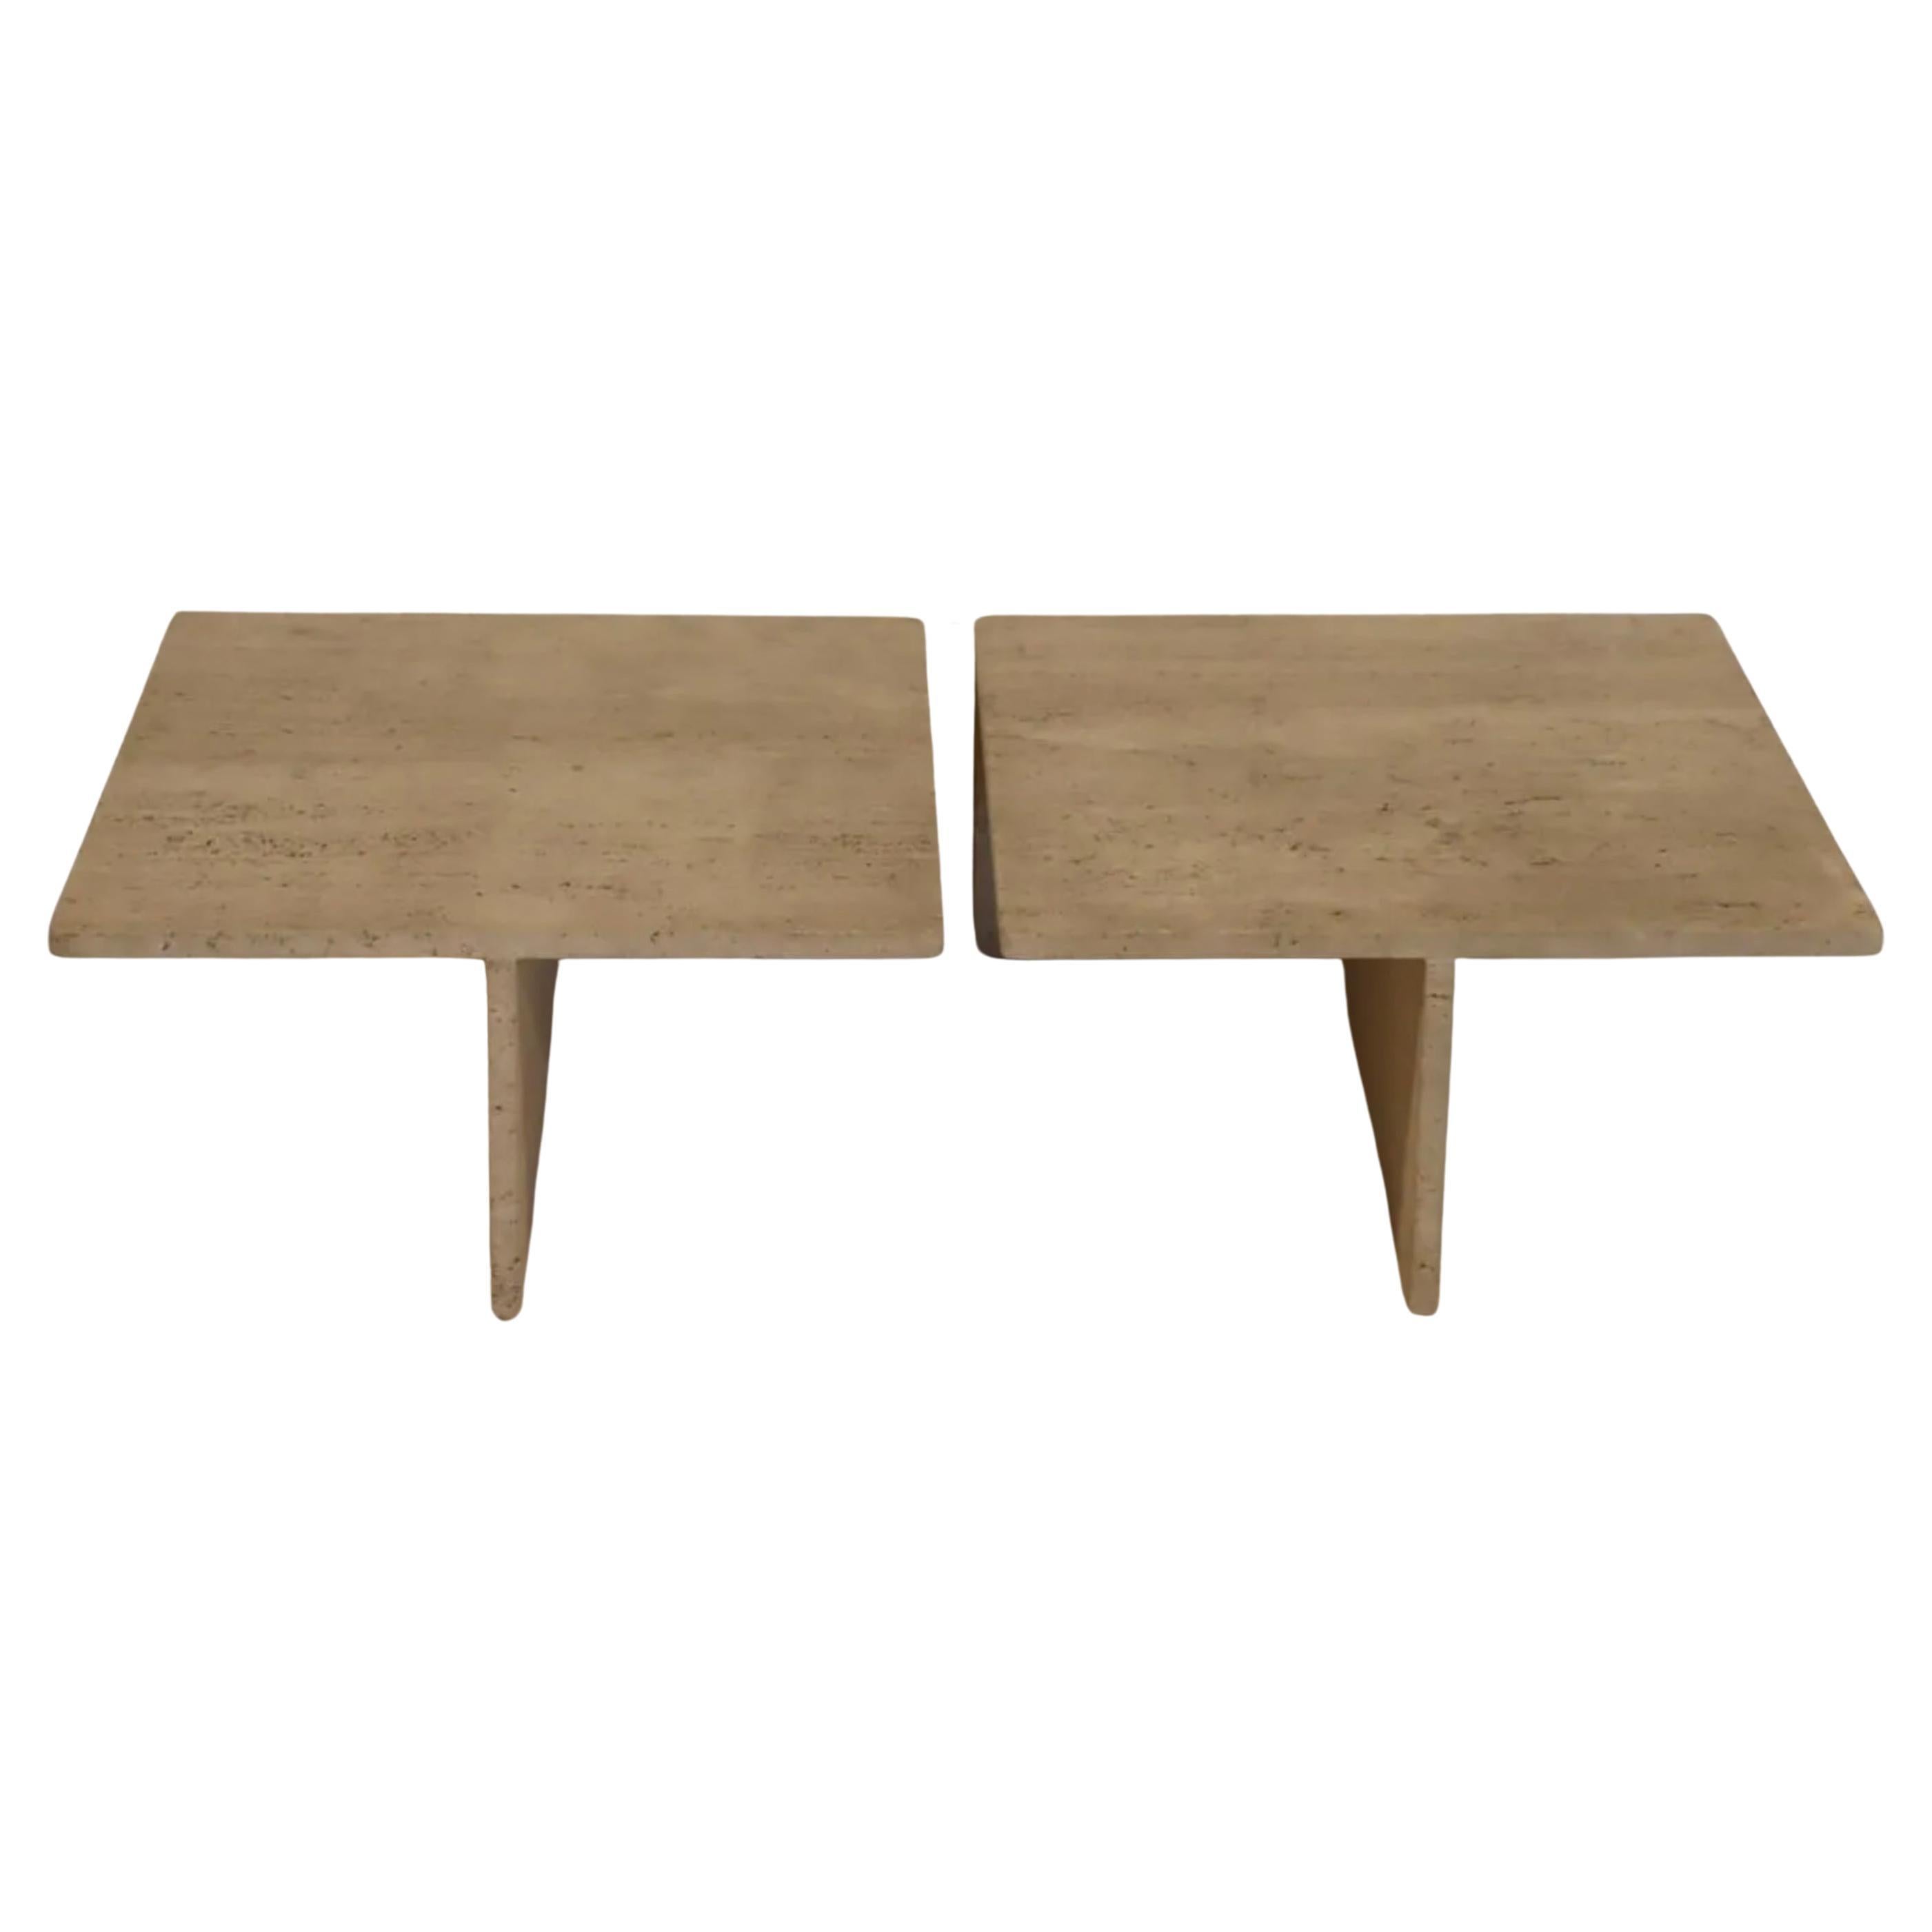 Pair of Low Square Up & Up Travertine end coffee tables or Nightstands circa 1970 Made in Italy. Simple design solid travertine end tables or nightstands. Located in Brooklyn NYC.

Made by Up & Up C.1970 Italy

Sold as (1) Pair a set of (2) Matching